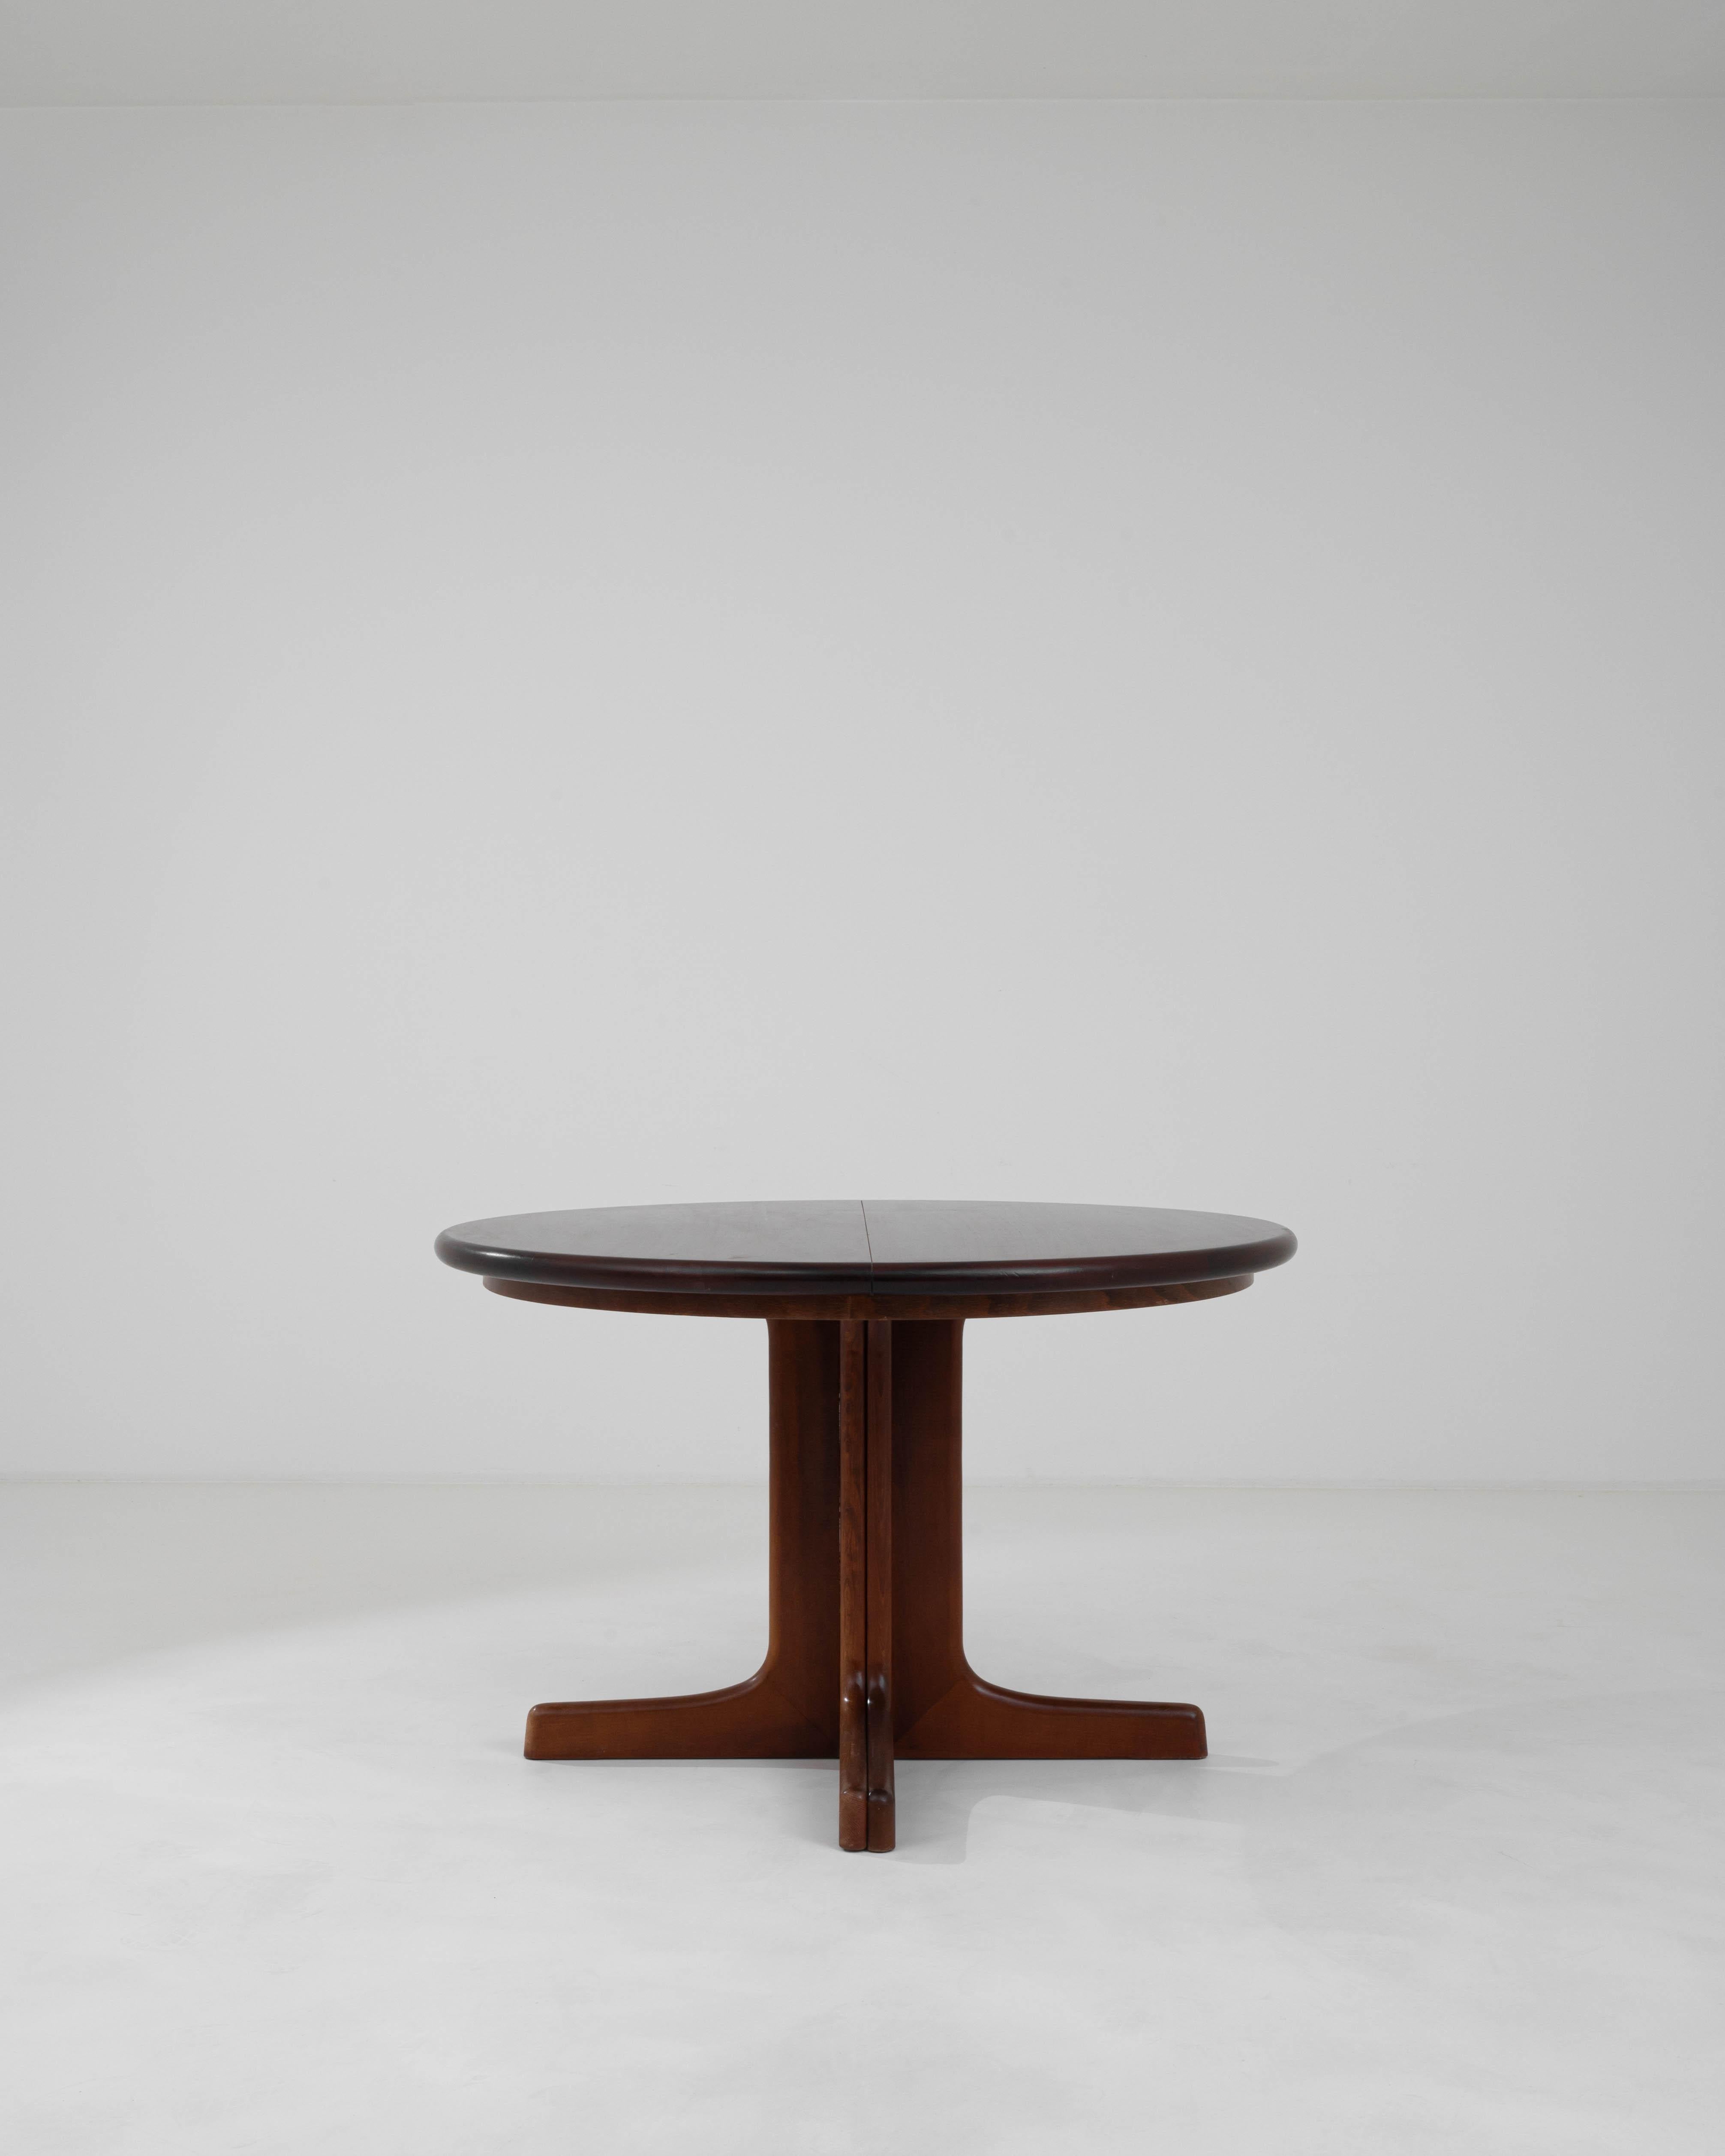 This 20th Century German Wooden Dining Table by Casala presents a harmonious blend of robust functionality and sleek design. The table's circular form encourages intimate gatherings, with its rich wooden top offering a warm and inviting surface for